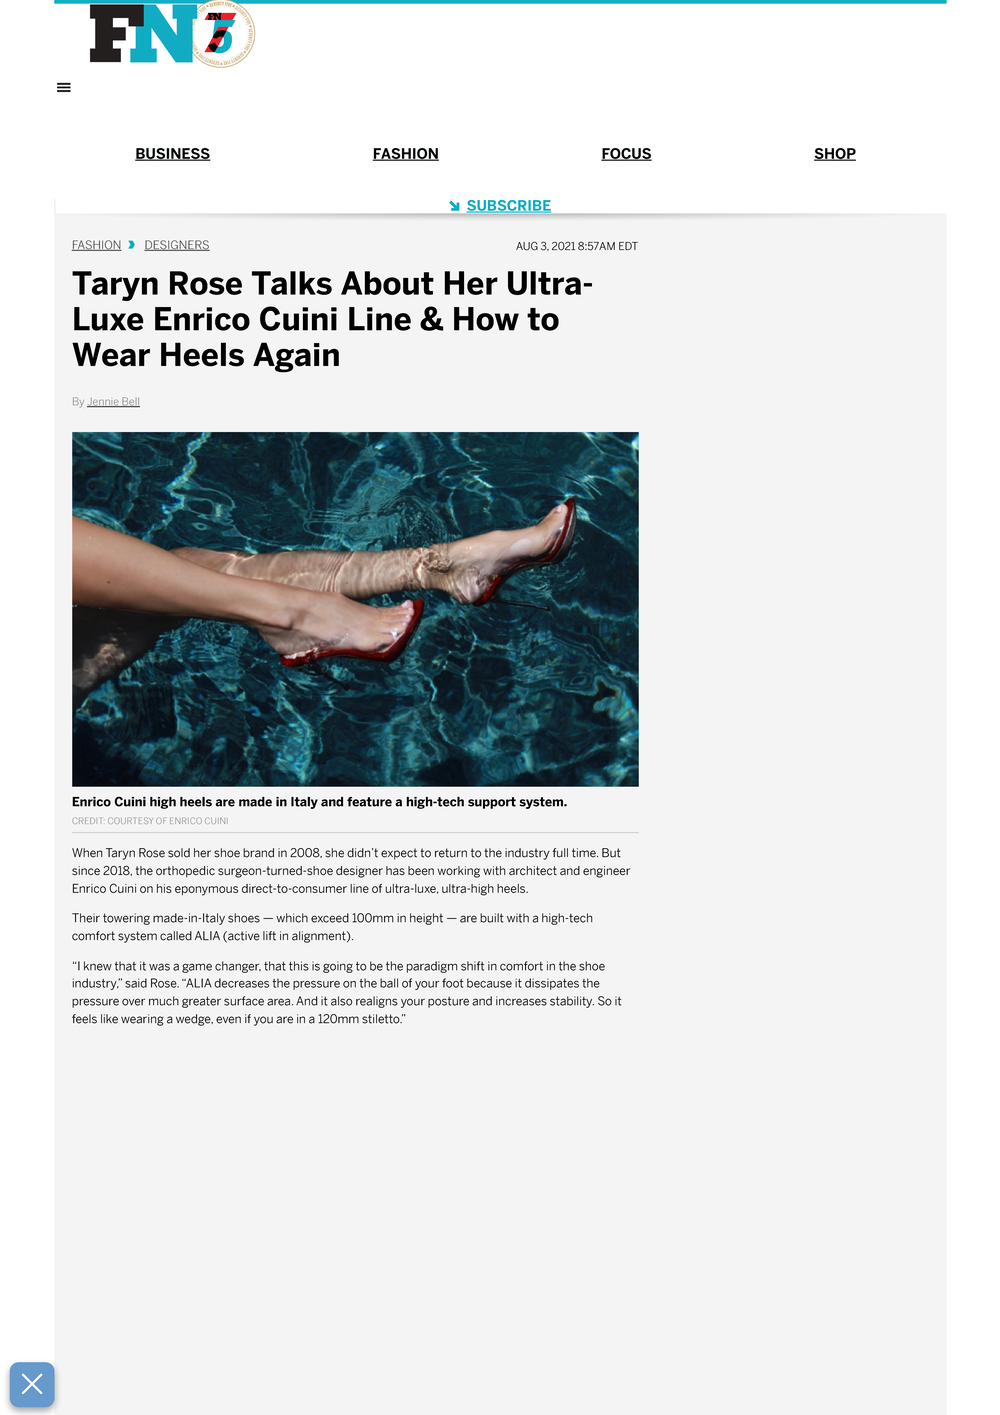 Taryn Rose Talks Enrico Cuini Luxury Brand and How to Return to Heels – Footwear News_Page_1.png